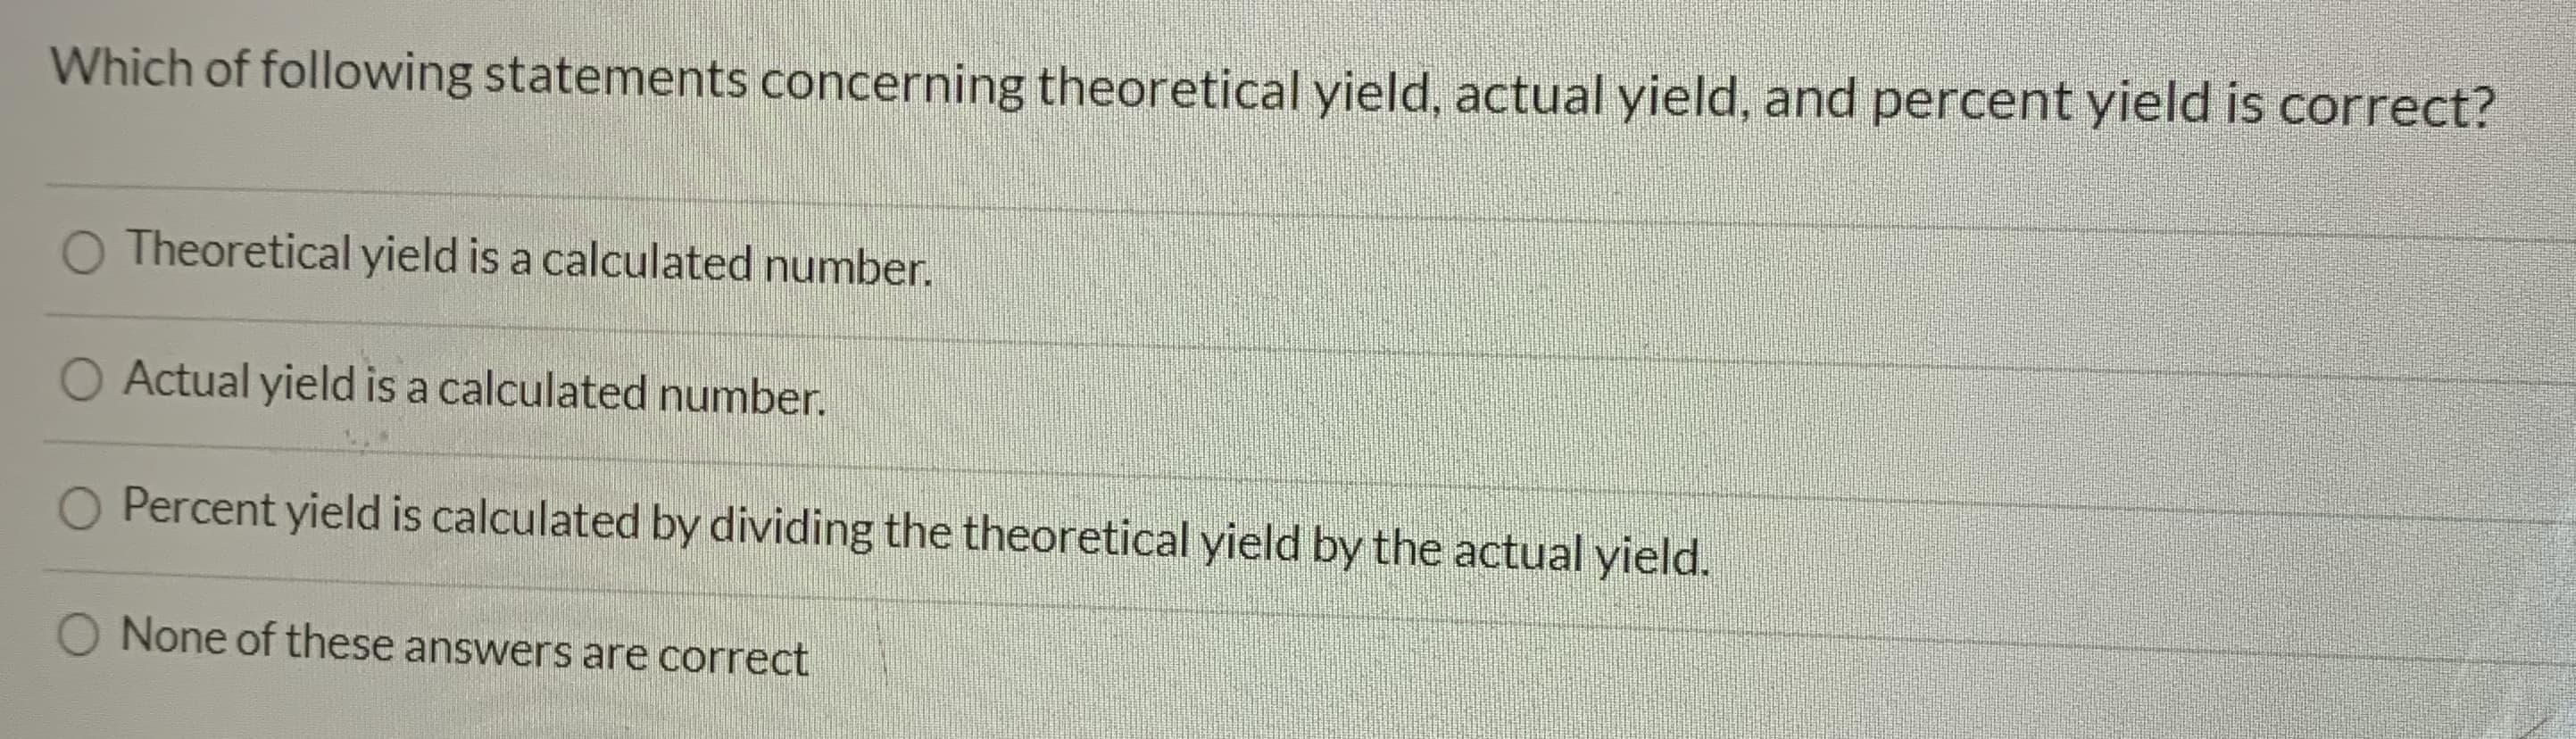 Which of following statements concerning theoretical yield, actual yield, and percent yield is correct?
O Theoretical yield is a calculated number.
O Actual yield is a calculated number.
O Percent yield is calculated by dividing the theoretical yield by the actual yield.
None of these answers are correct
